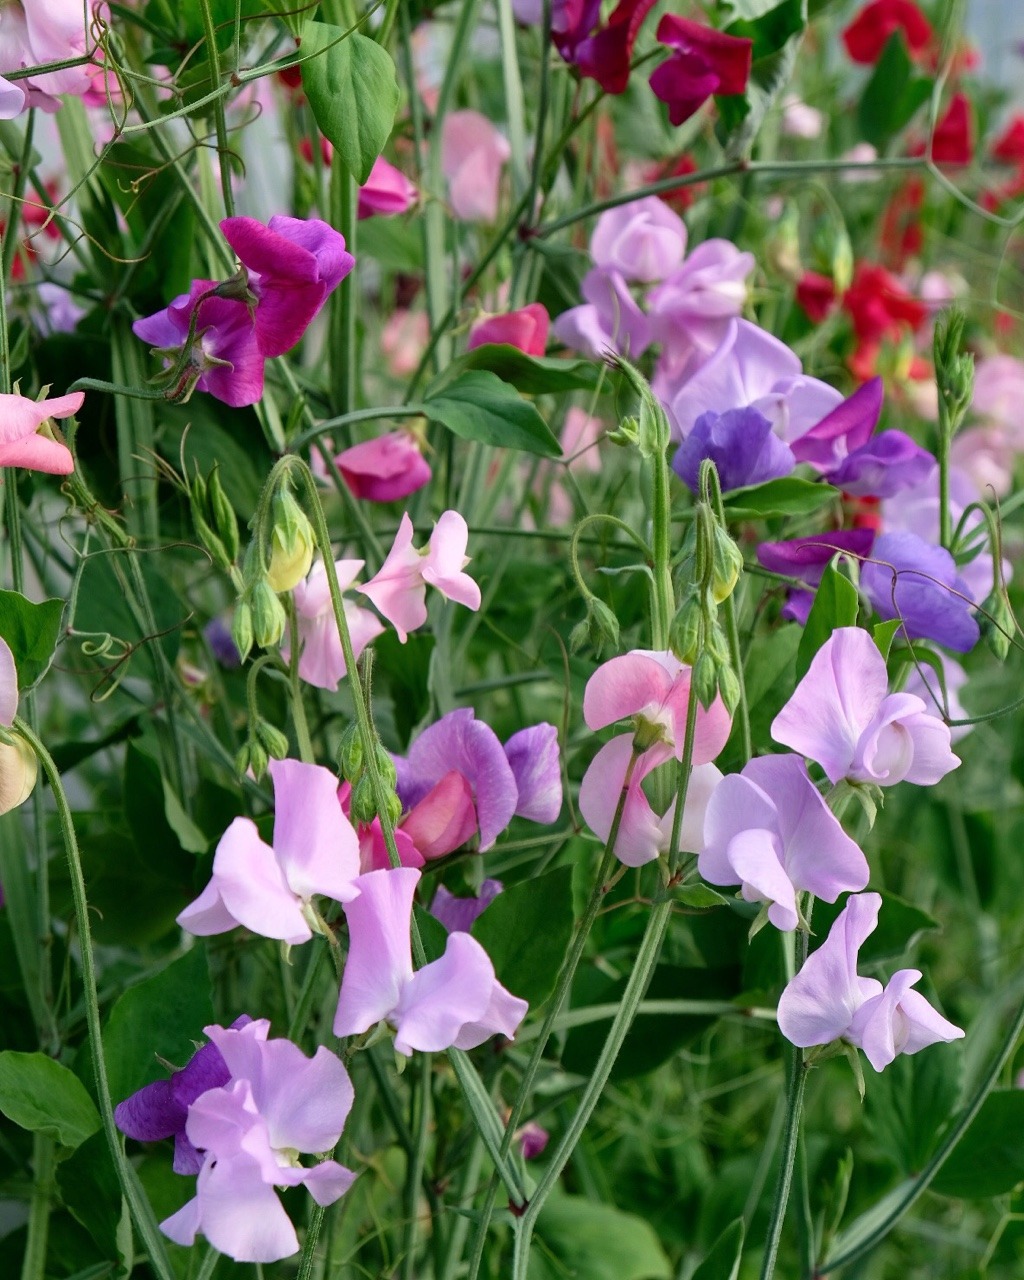 eat-to-thrive: âSweet peas ð¸ð¿ â